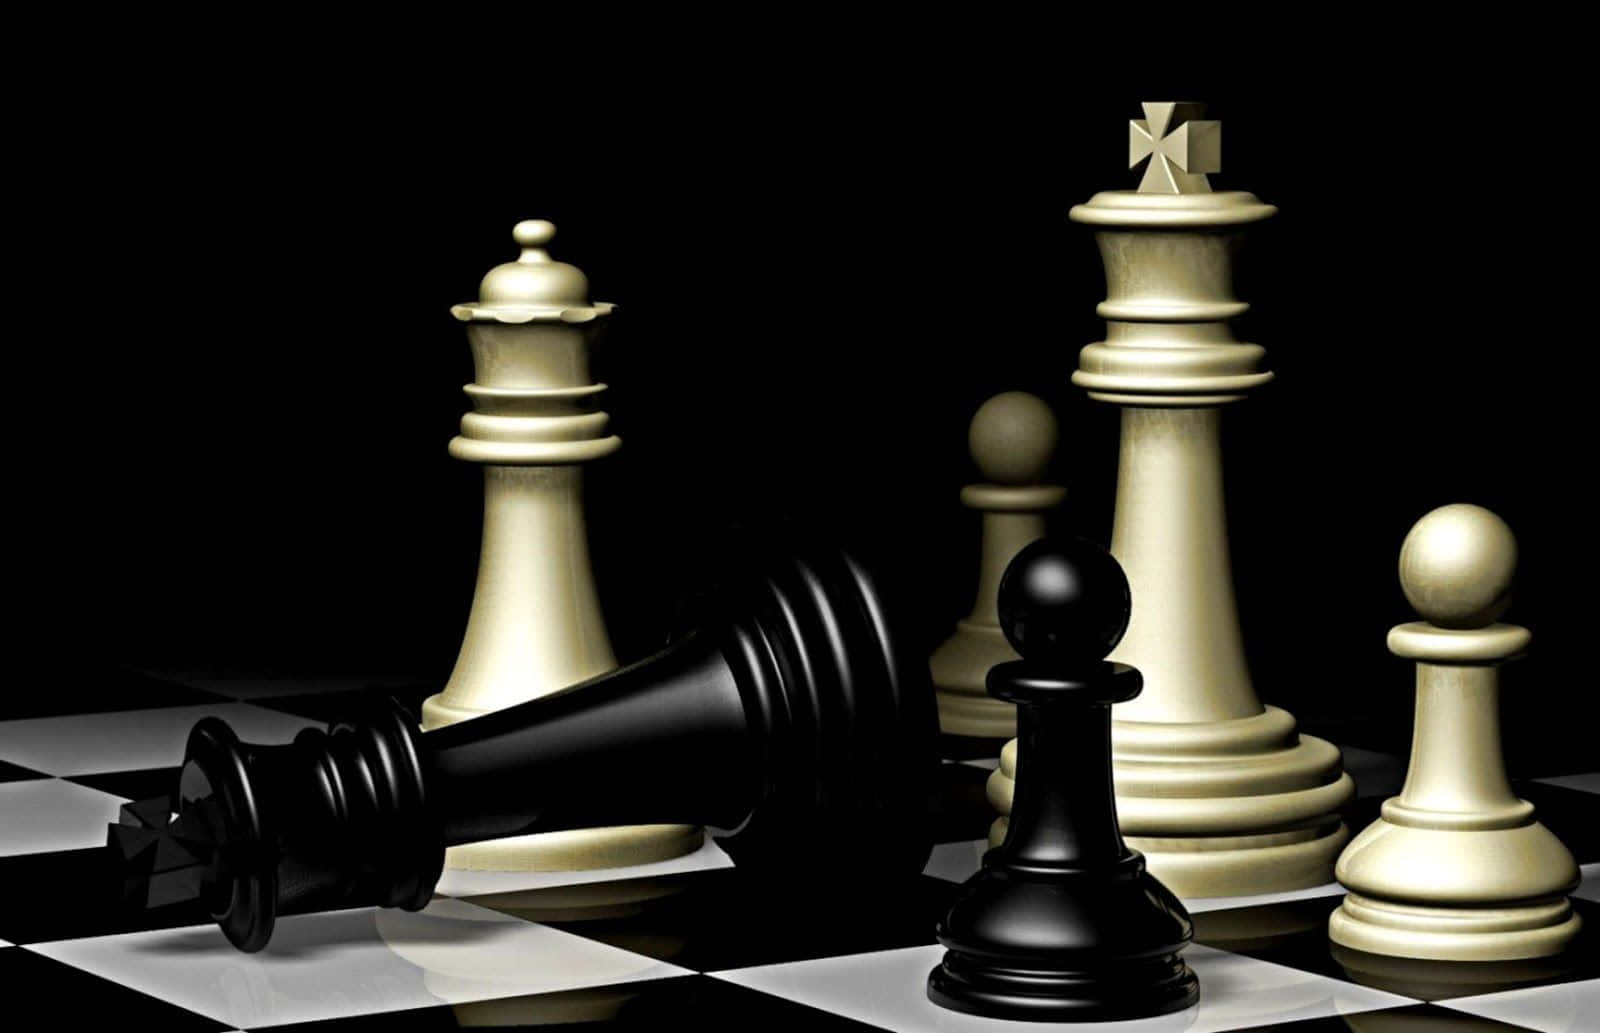 200+] Chess Backgrounds